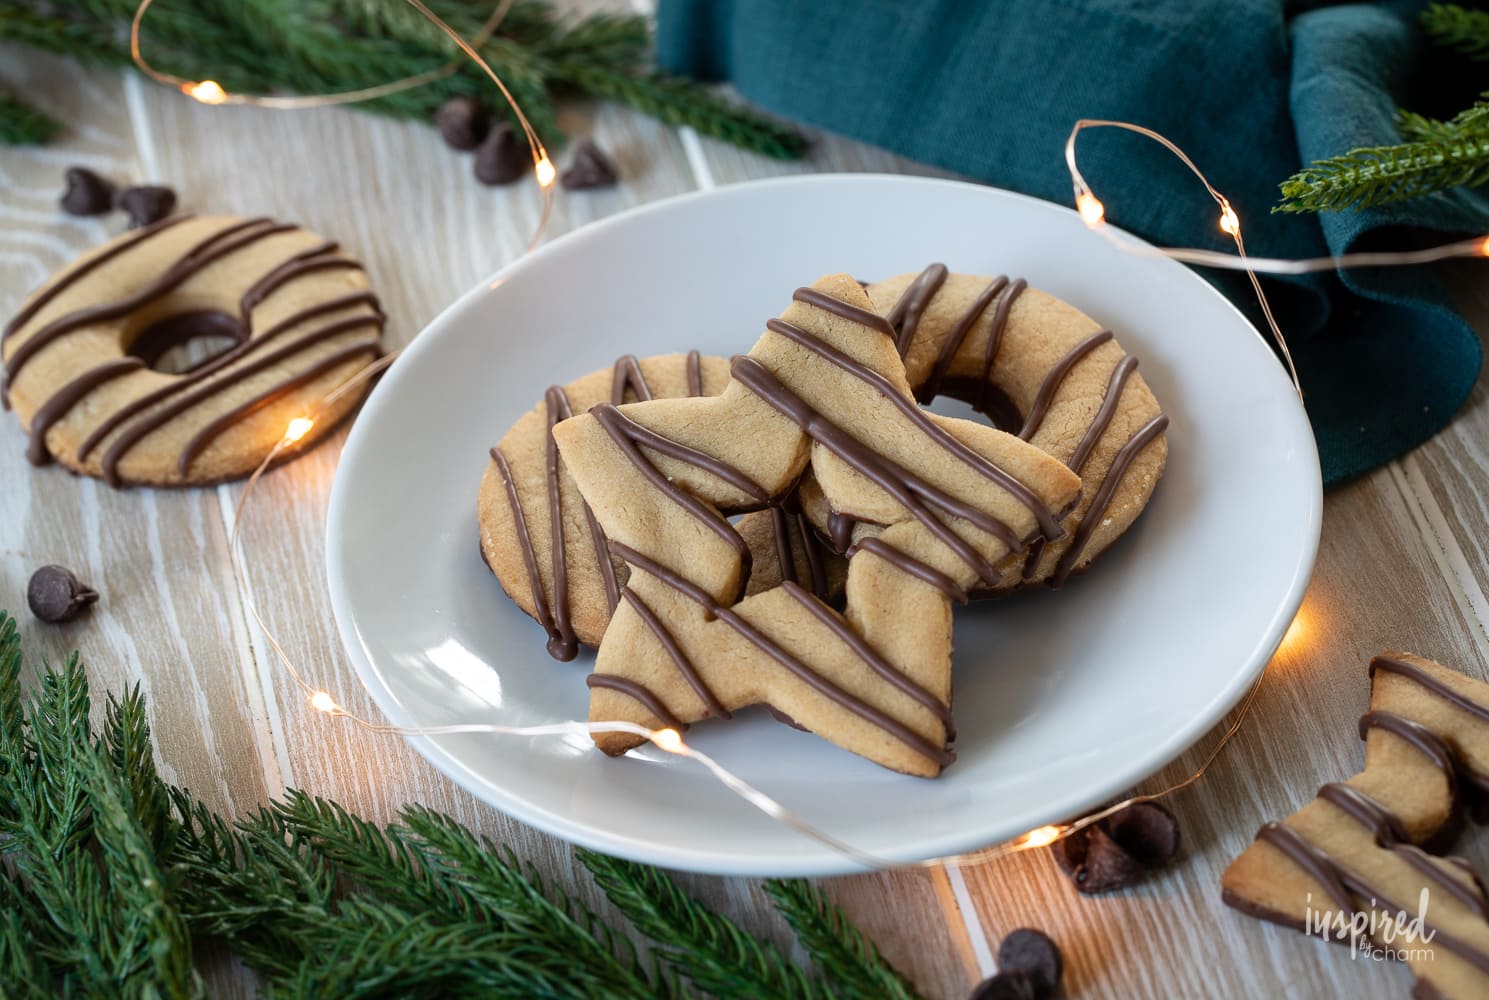 Chocolate Striped Peanut Butter Shortbread Cookies #cookie #shortbread #peanutbutter #chocolate #recipe #christmas #holday